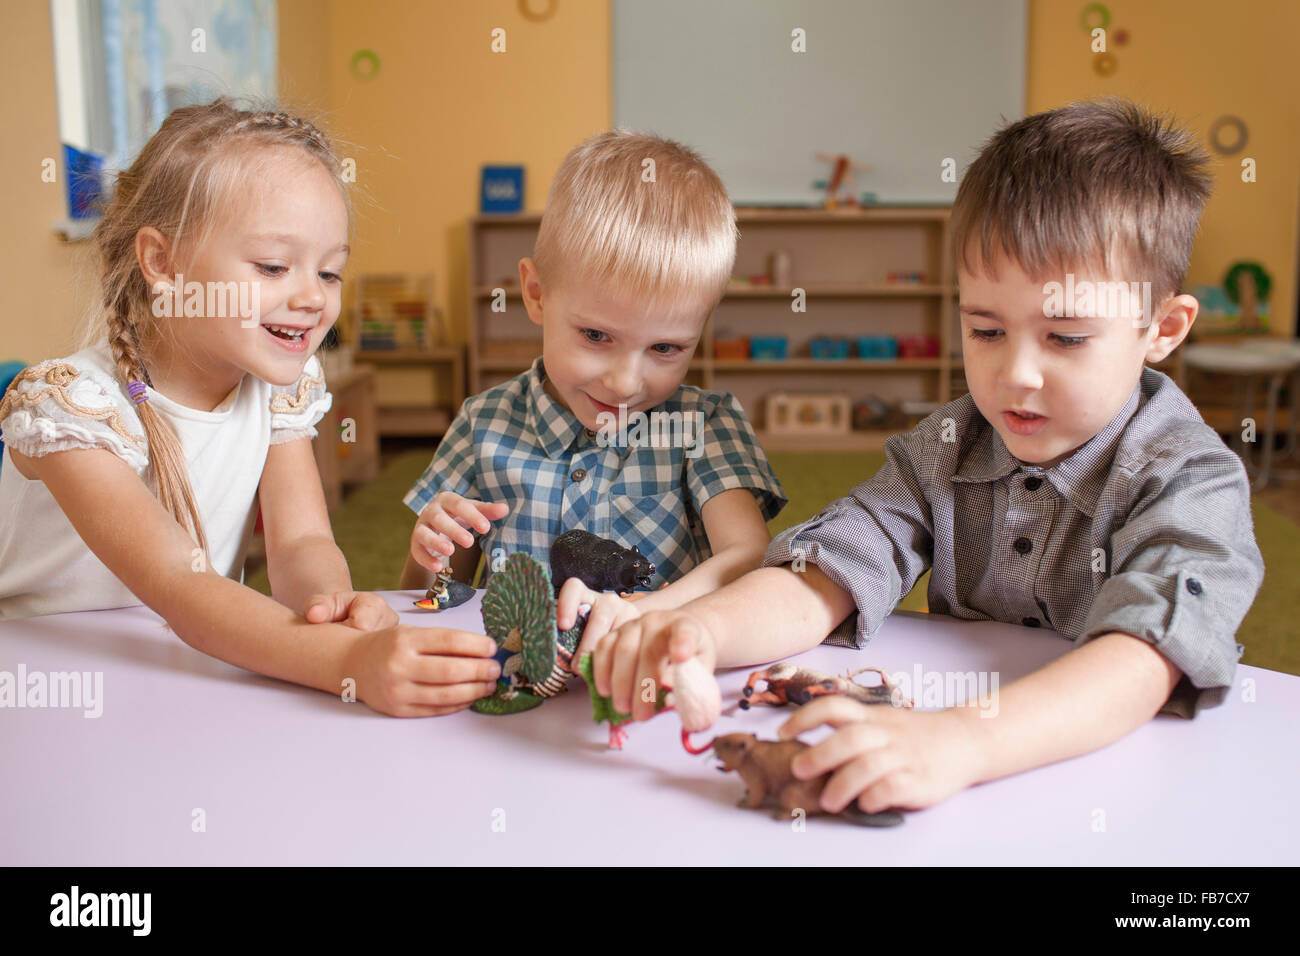 Children playing with animal toys at table in classroom Stock Photo